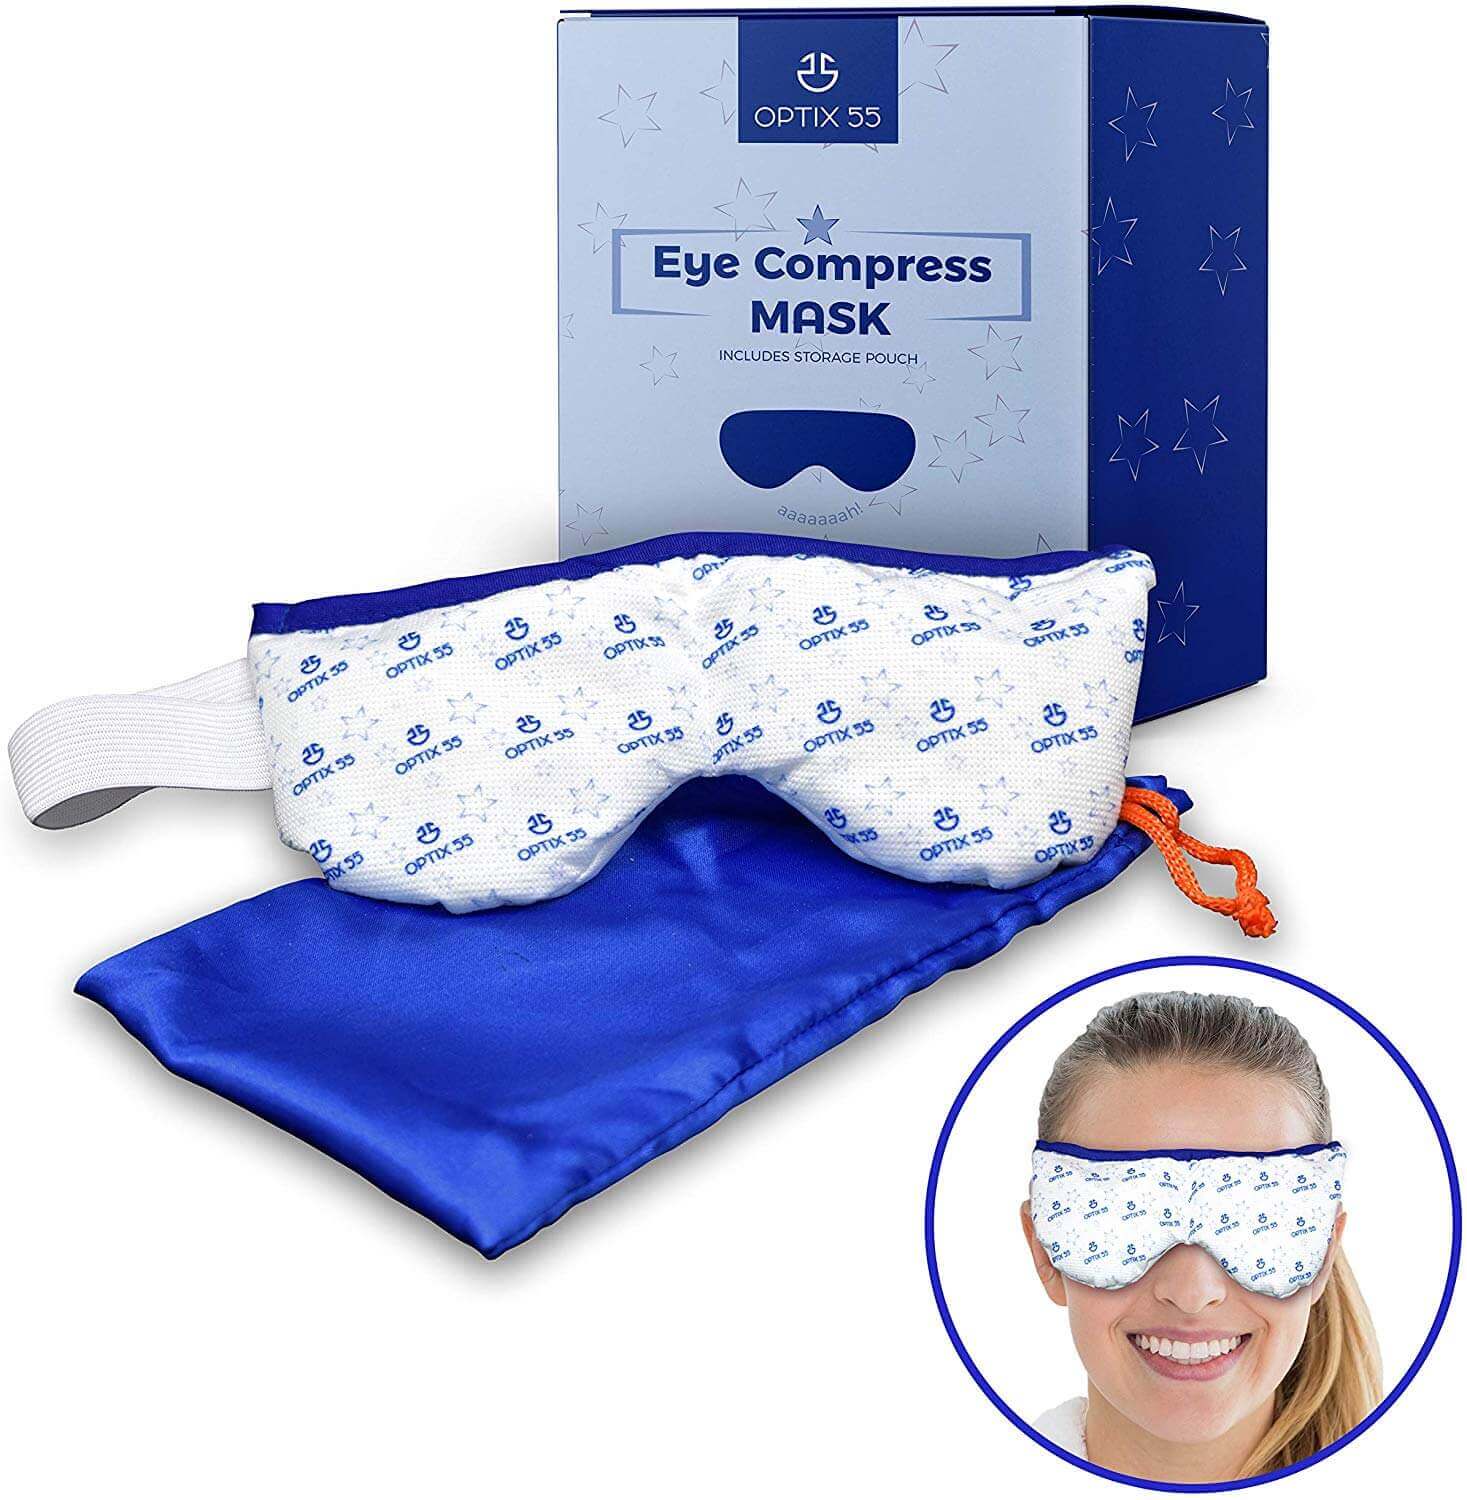 Eye Mask for Dry Eyes, Moist Heat Eye Compress Pad for Pink Eye, Blepharitis, Puffy Eyes, MGD, Stye Treatment Relief | Microwaveable Warm Compress for Eyes | Washable & Reusable with Storage Pouch